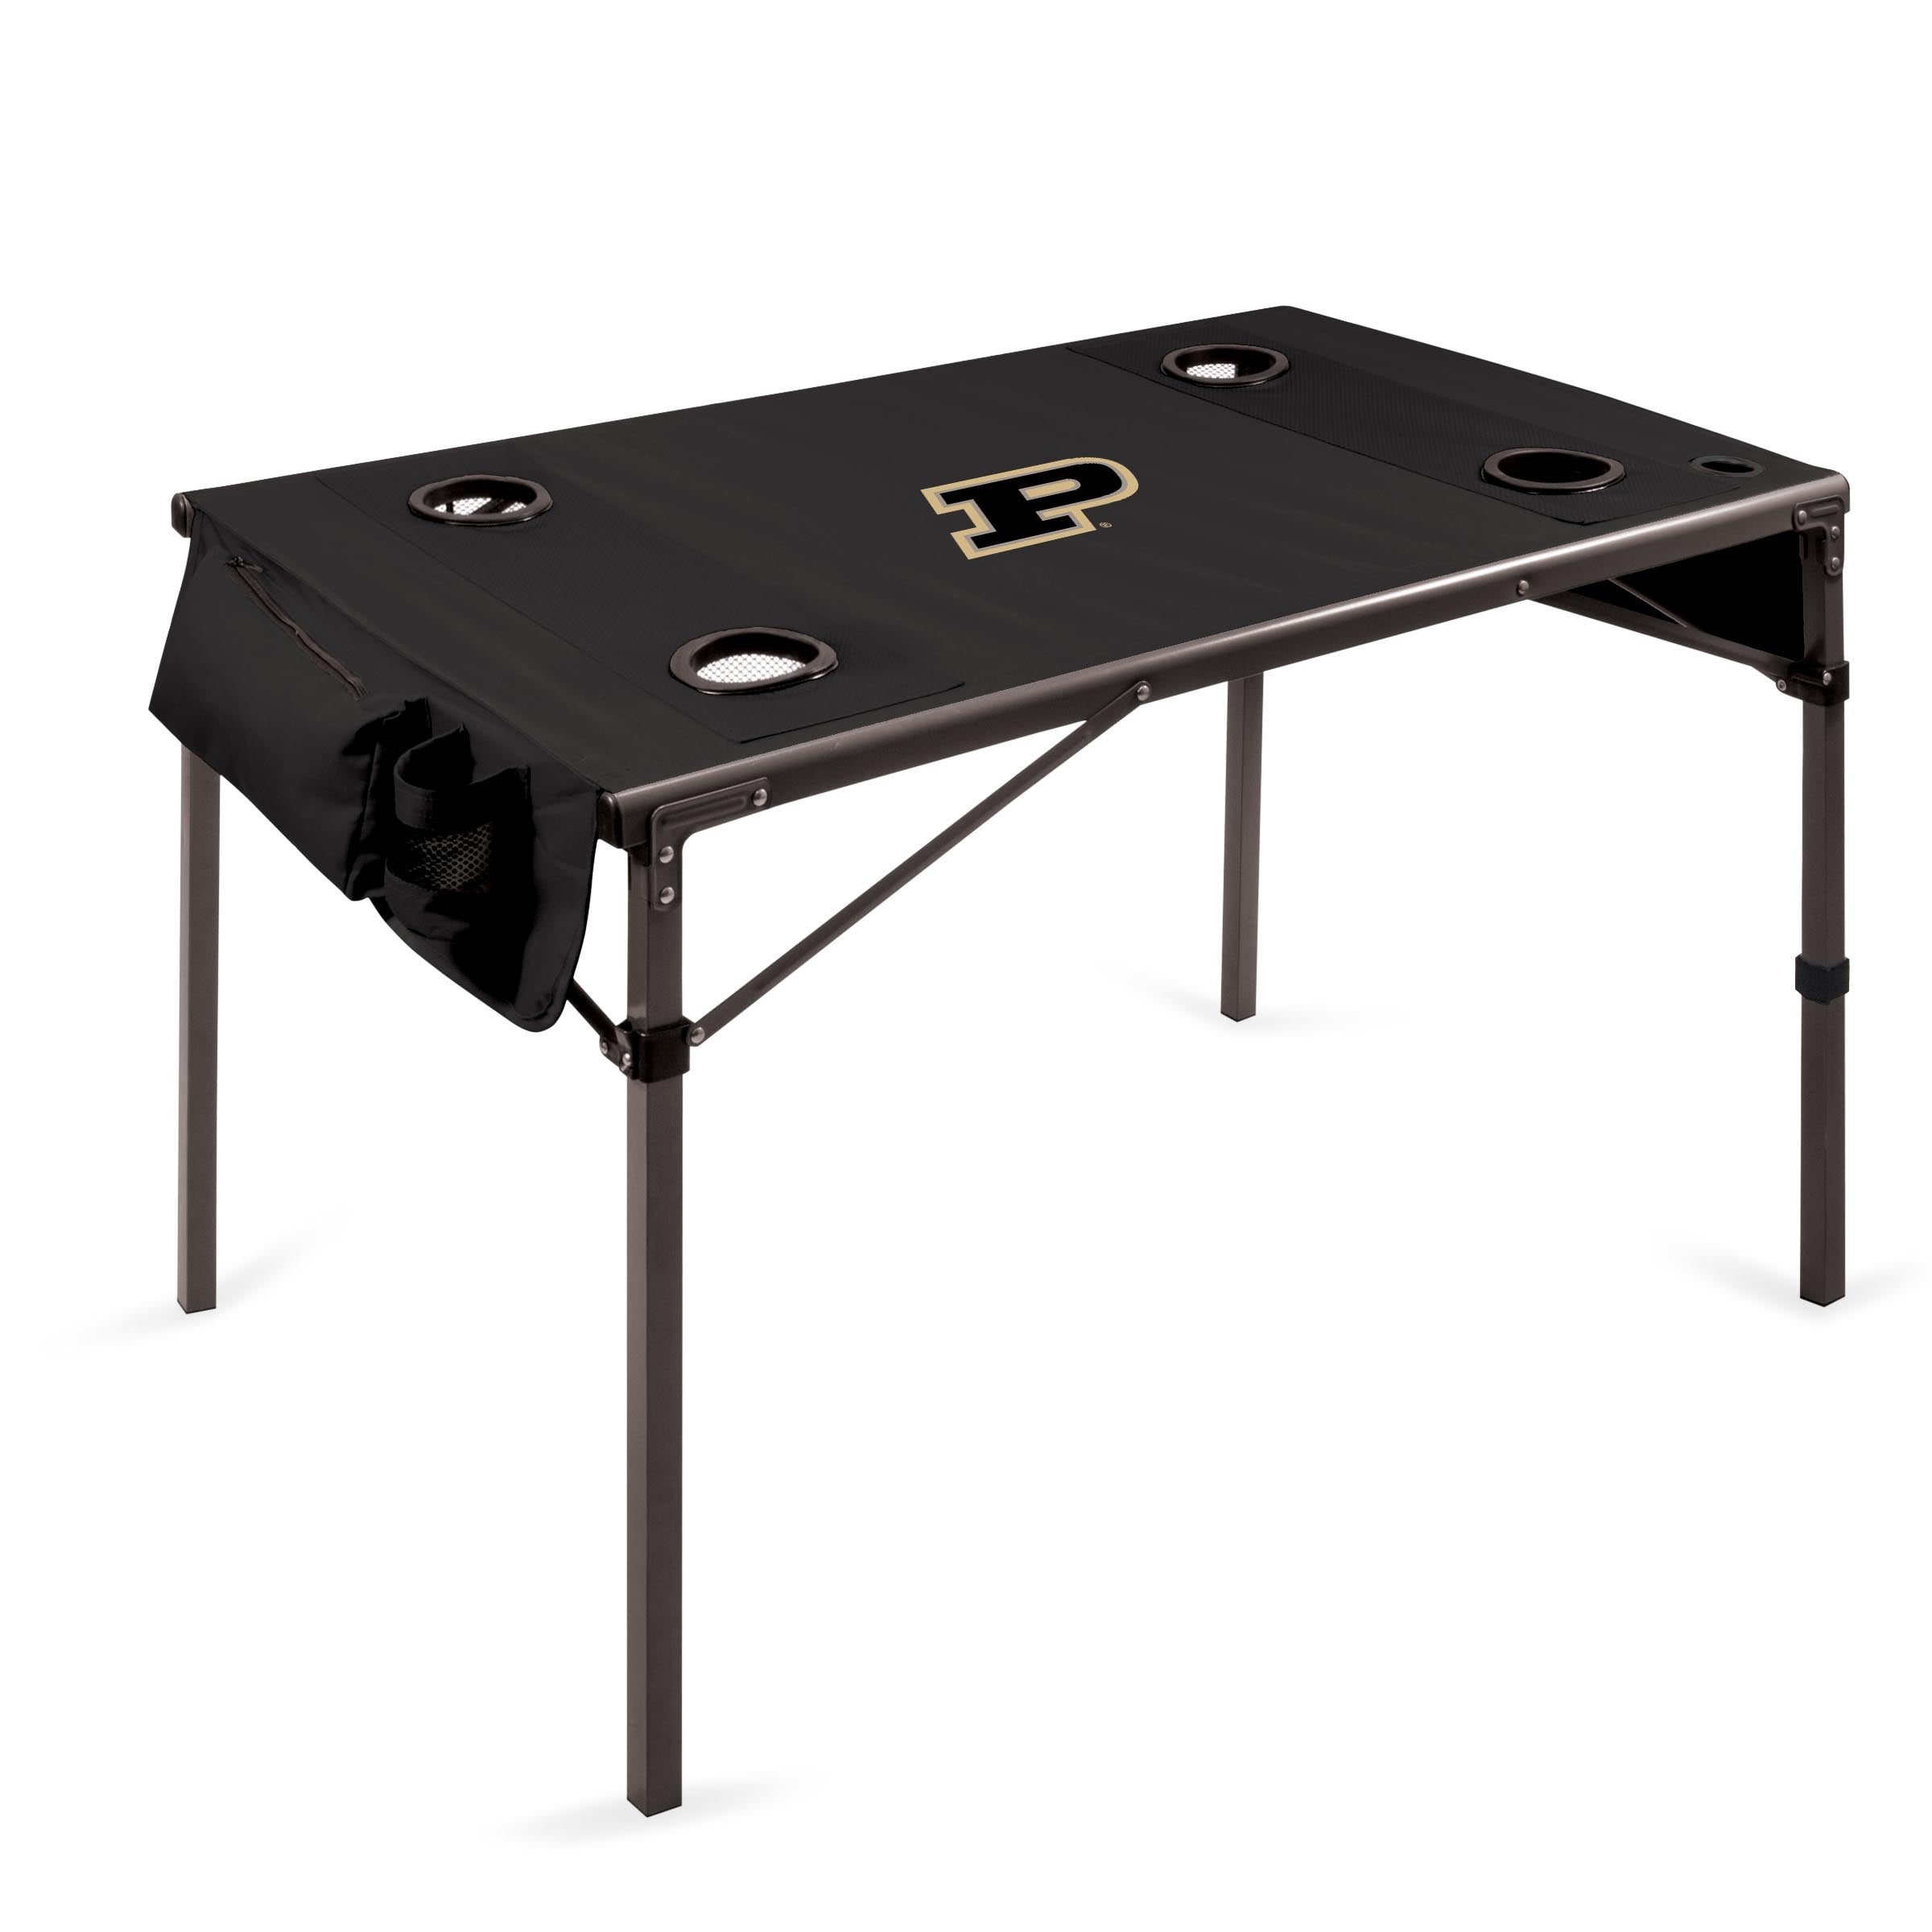 Purdue Boilermakers - Travel Table Portable Folding Table